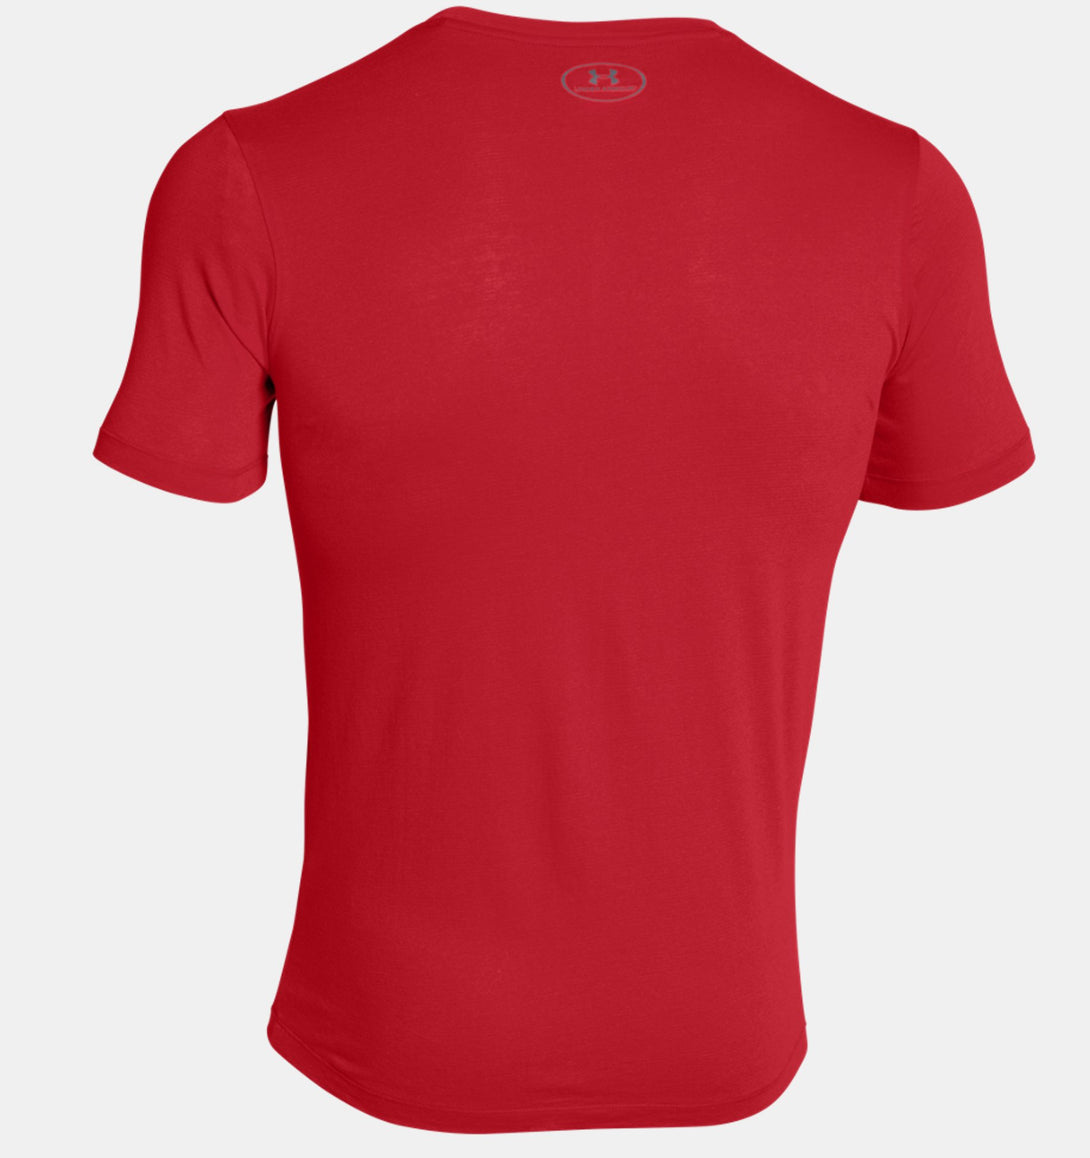 Under Armour Charged Cotton Men's Tee